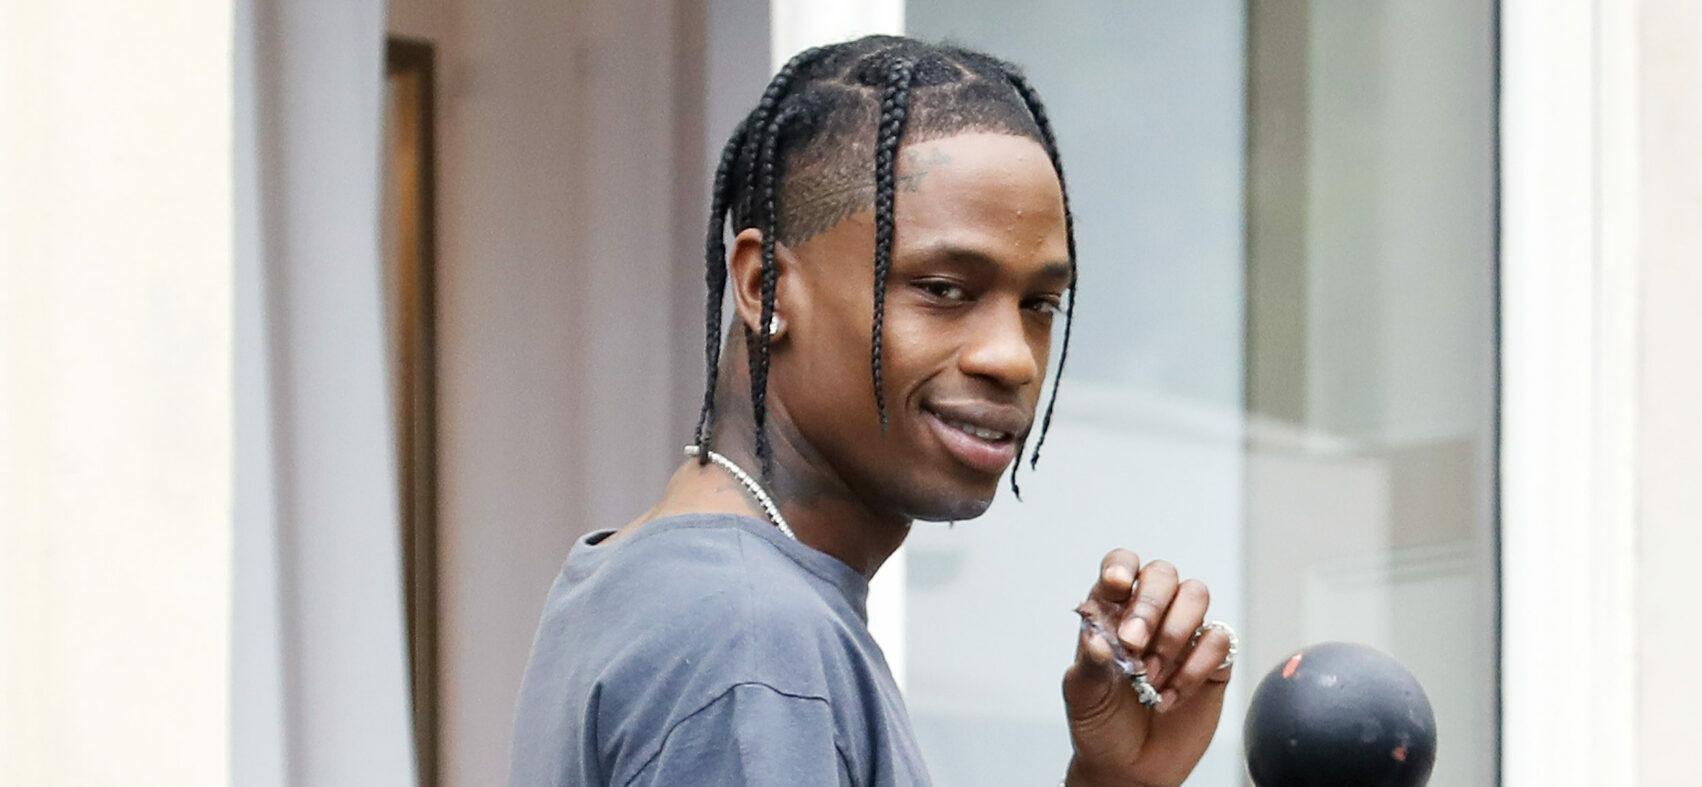 Travis Scott & The Astroworld Organizers Avoid Criminal Charges For Deadly Crowd Crush